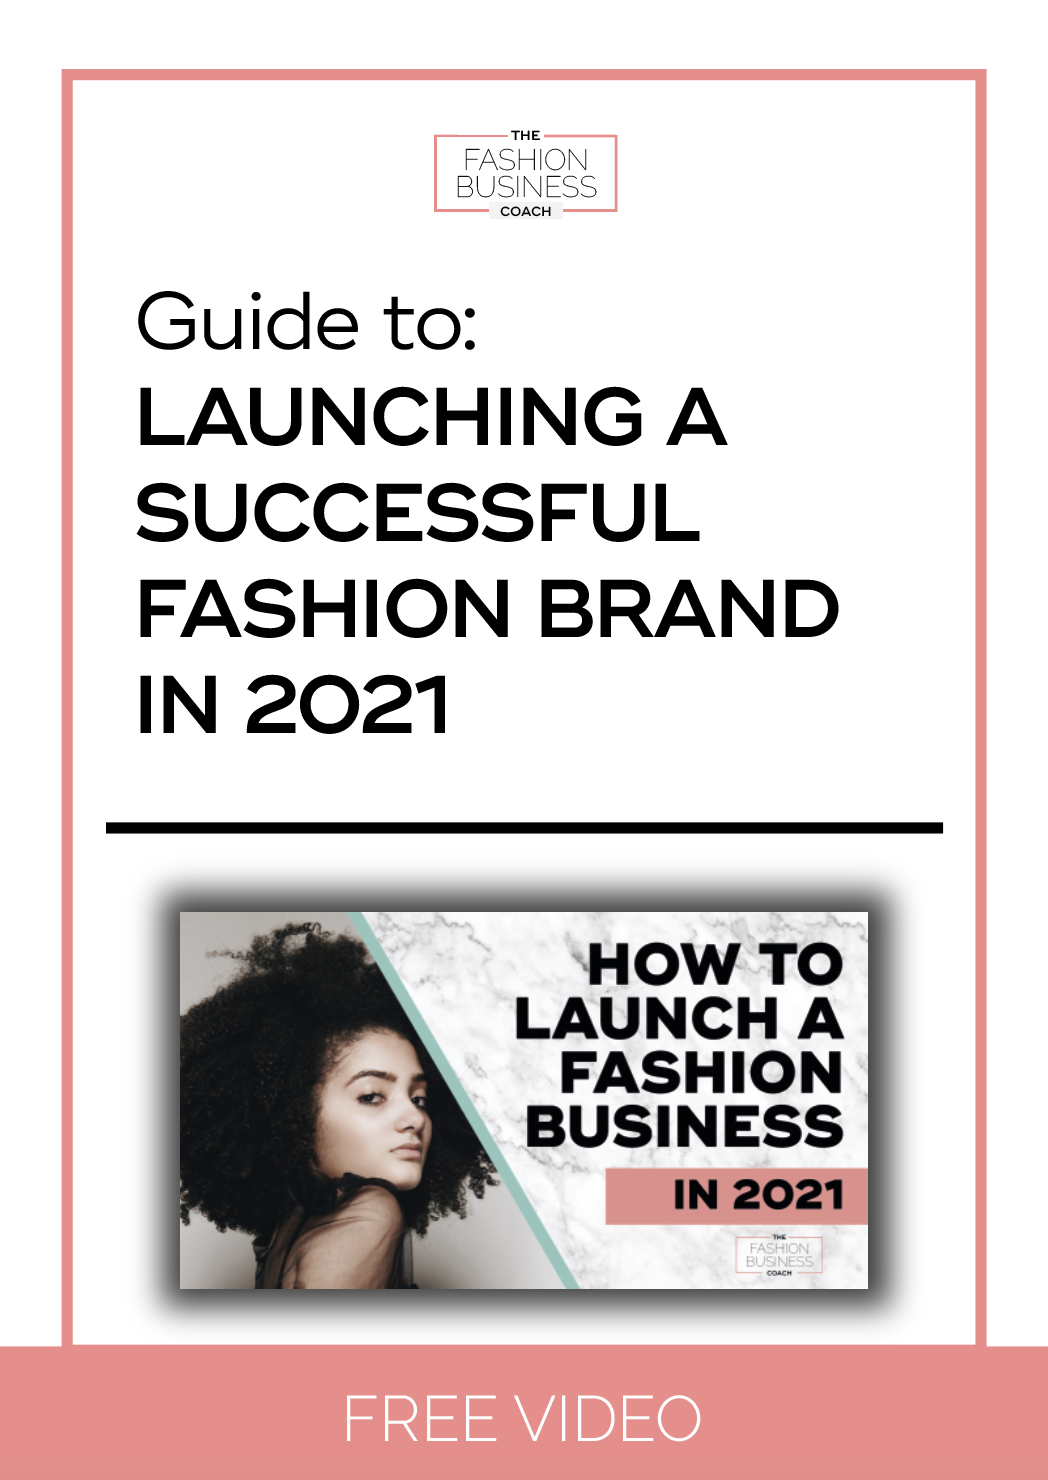 Guide to Launching a Successful Fashion Brand in 2021 3.png